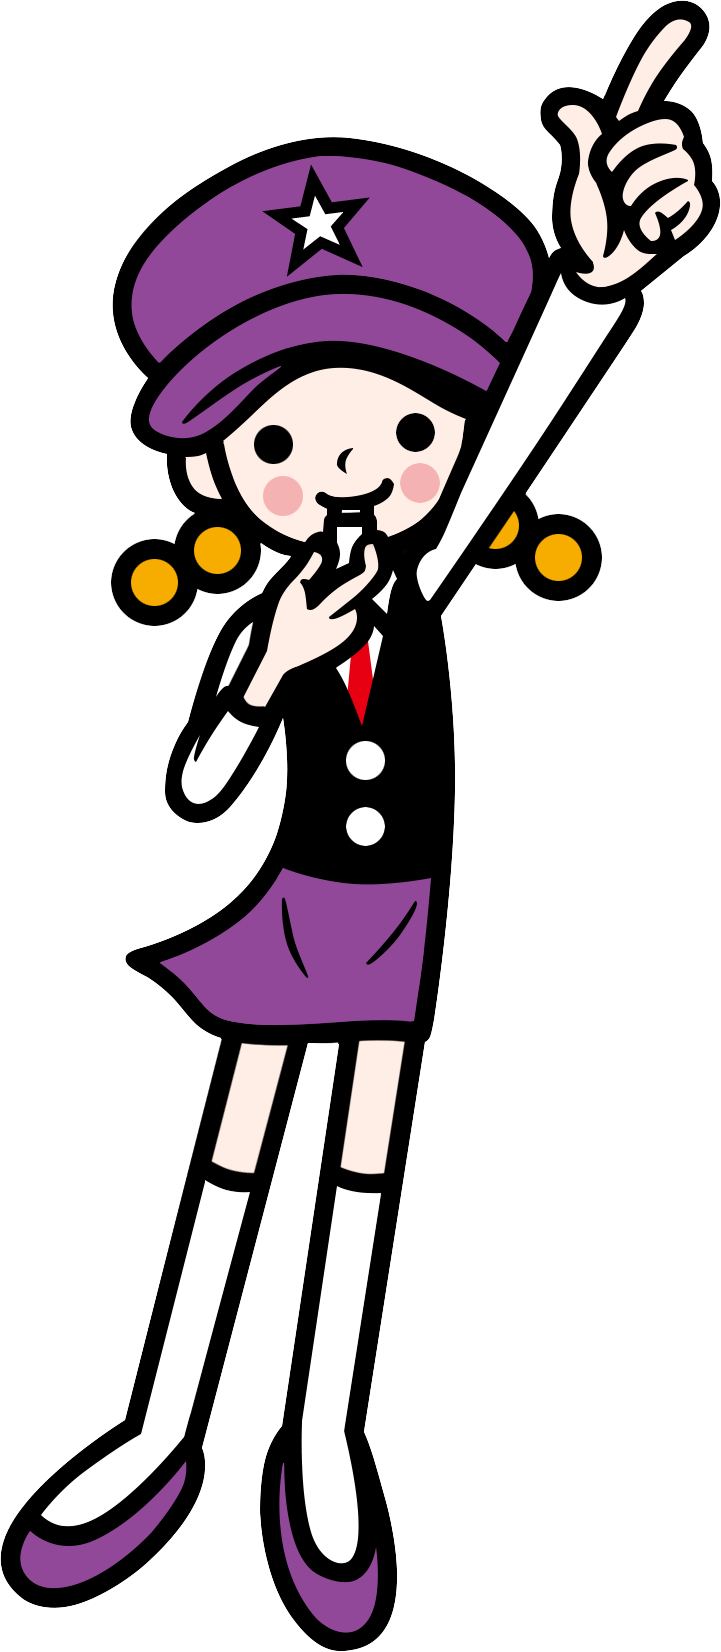 Character from rhythm heaven video game with a stylish outfit